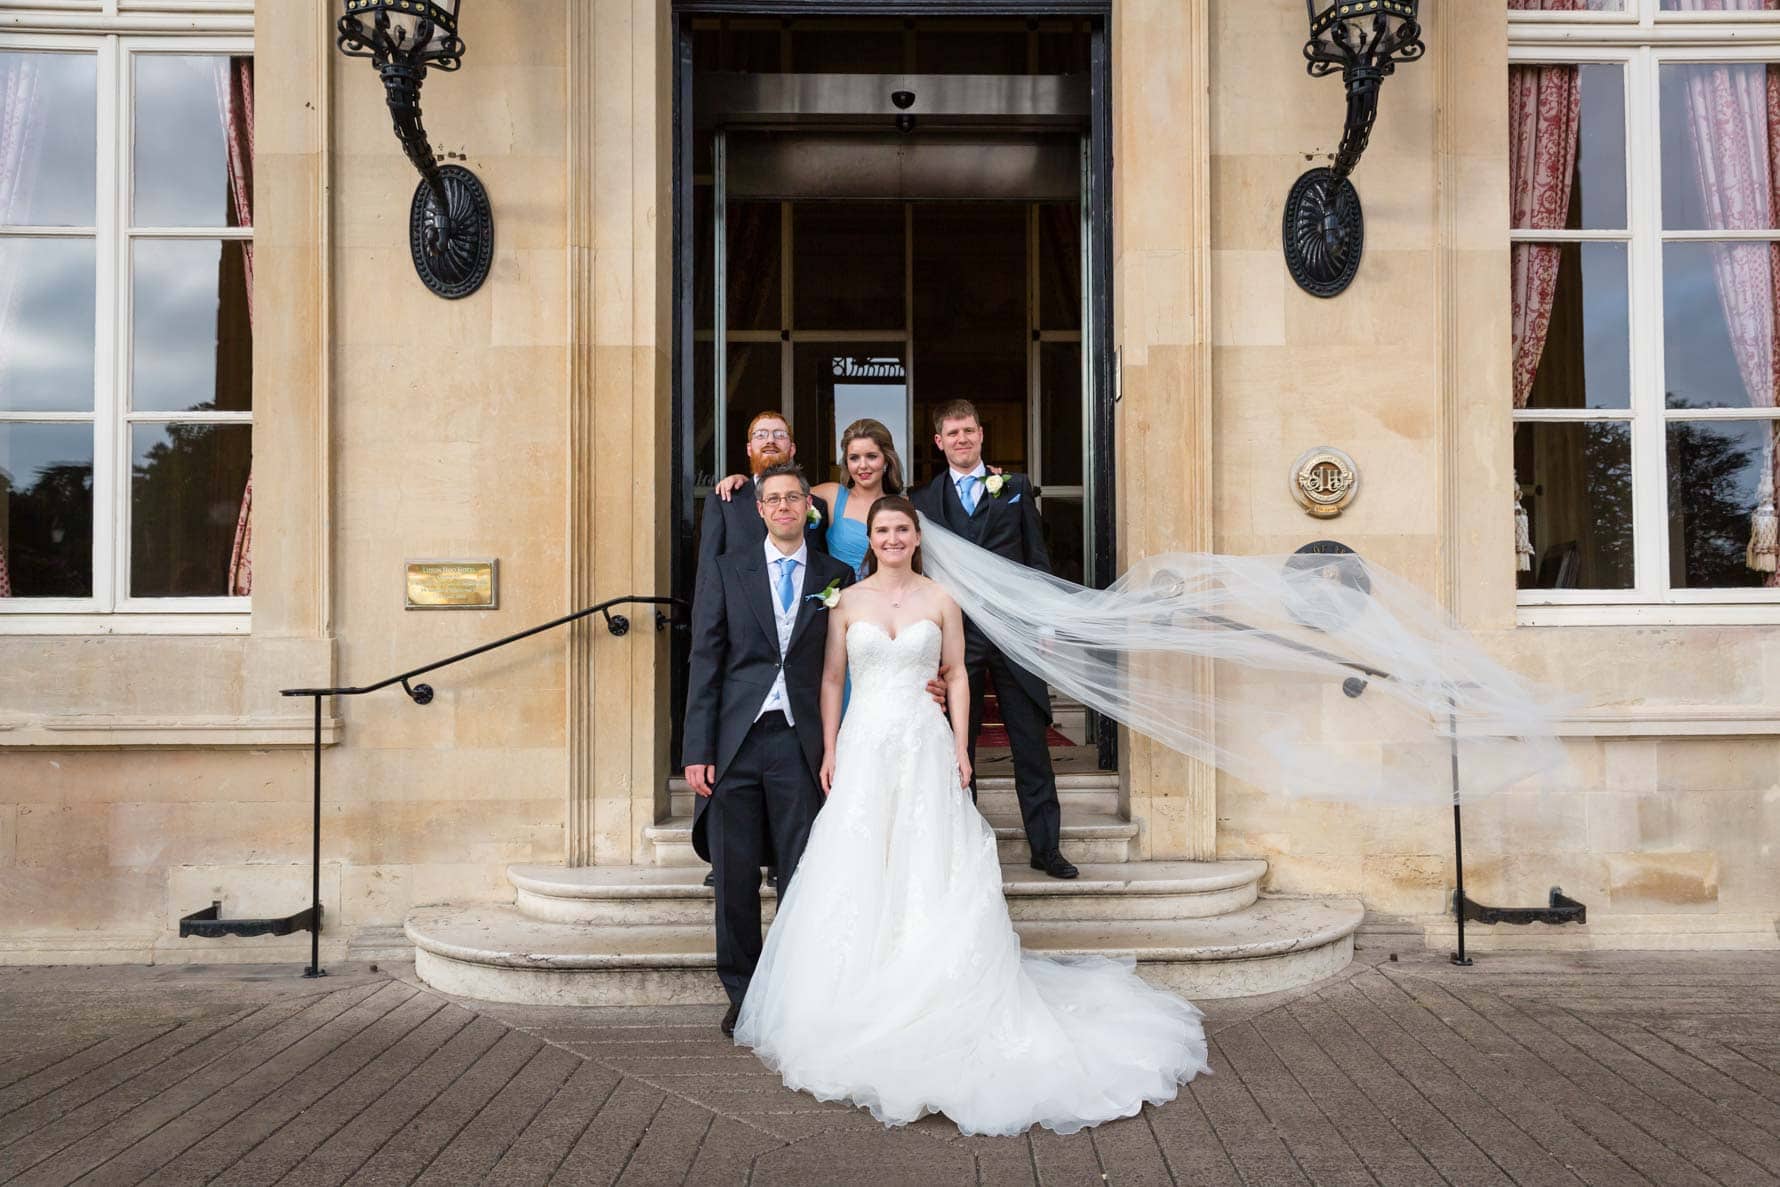 Bridal party on steps at Luton Hoo Hotel by Bedfordshire wedding photographer Graham Warrellow